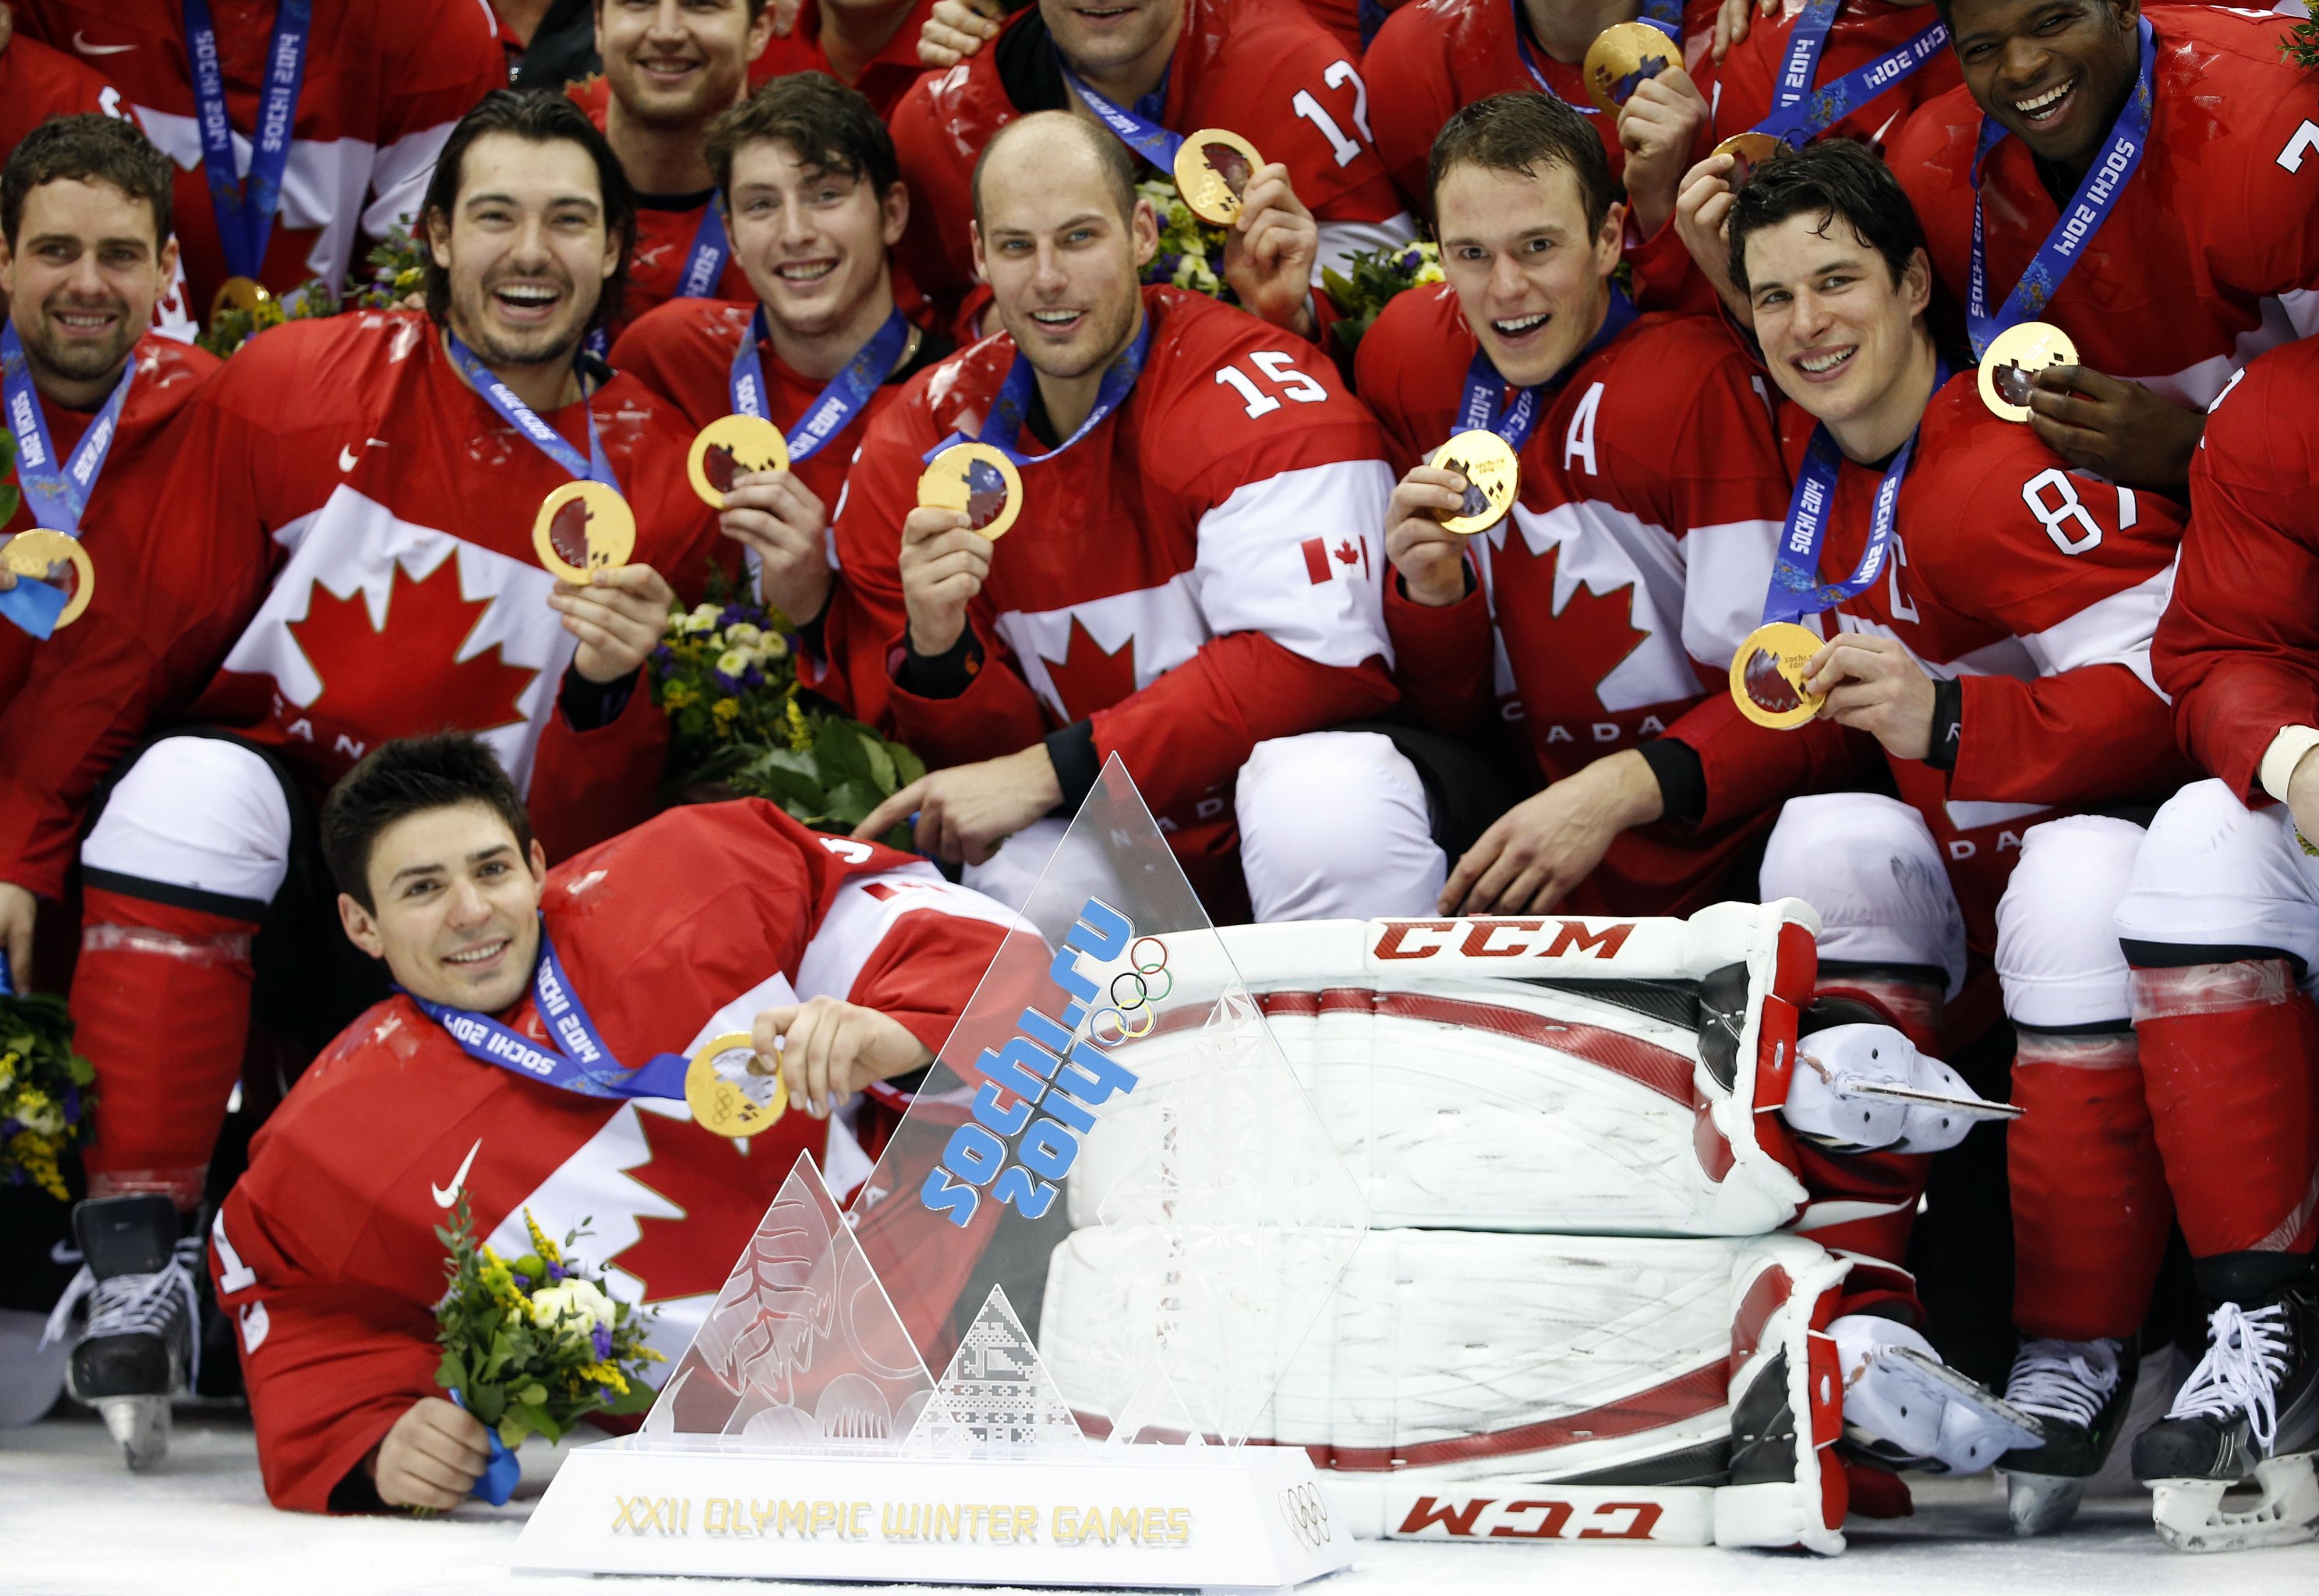 Team Canada to have third jersey at 2014 Olympics? 